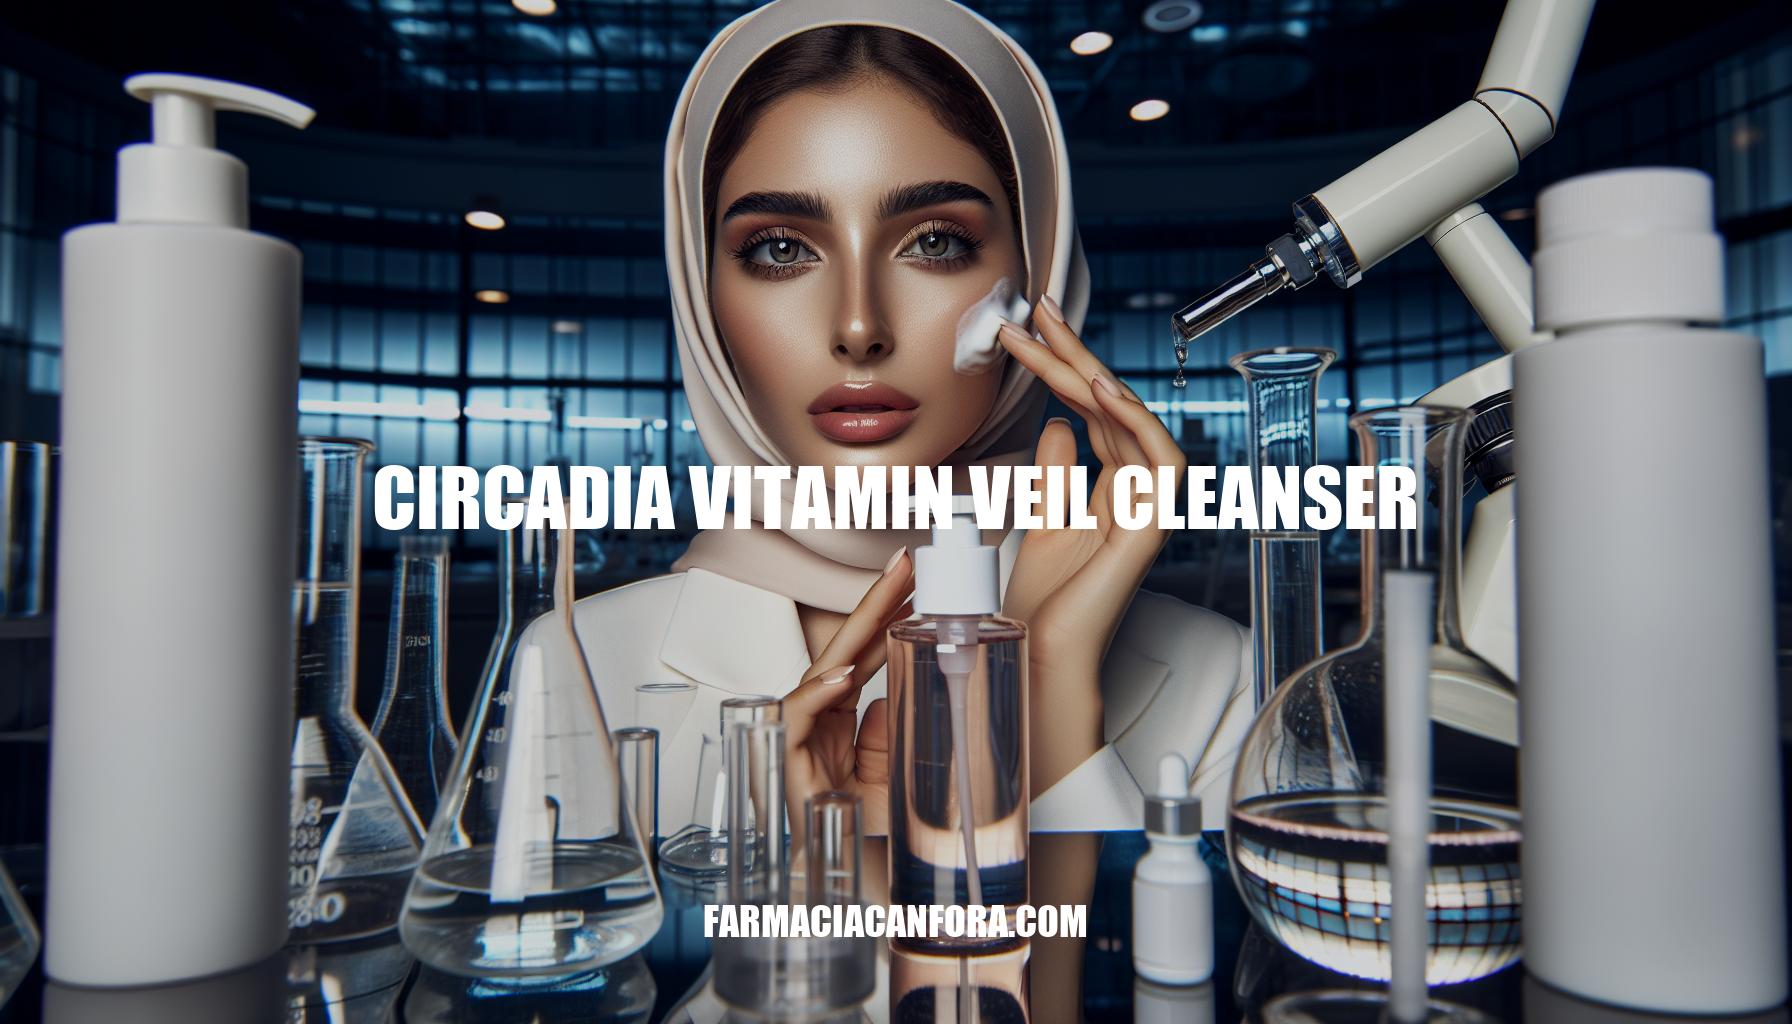 Circadia Vitamin Veil Cleanser: Revitalizing Your Skin with Science